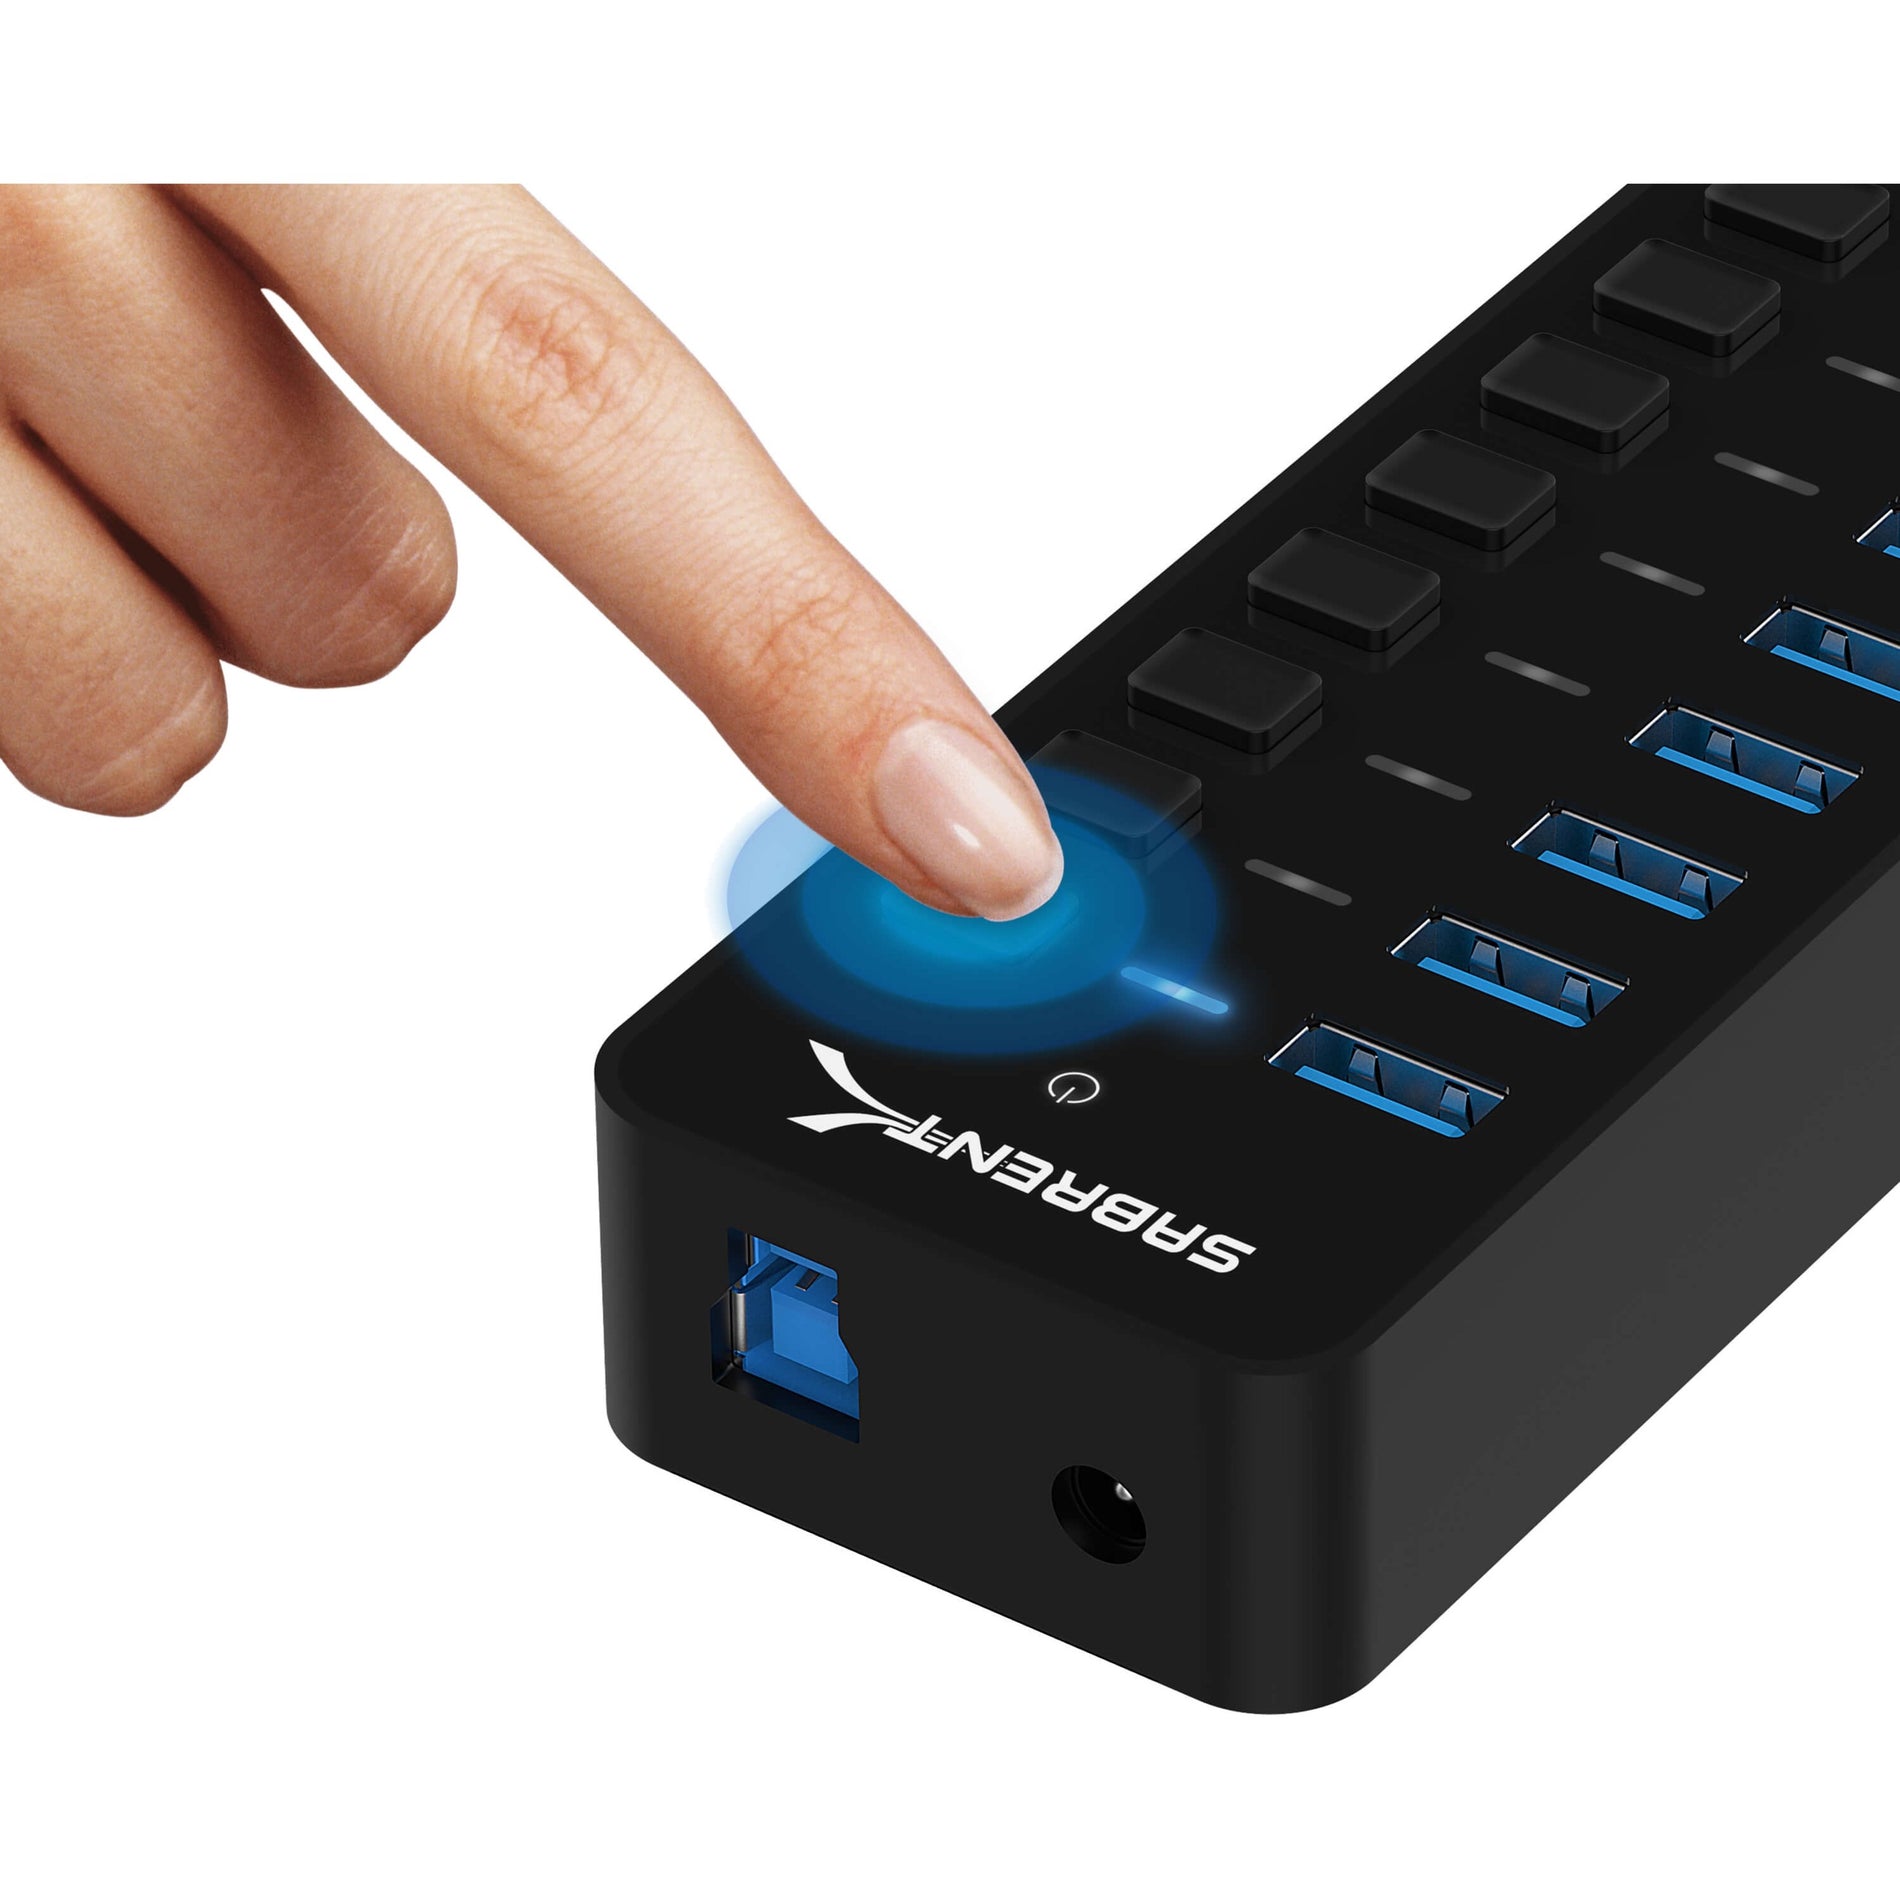 Sabrent HB-BU10 10-Port USB 3.0 Hub with Individual Power Switches and LEDs, Expand Your USB Connectivity